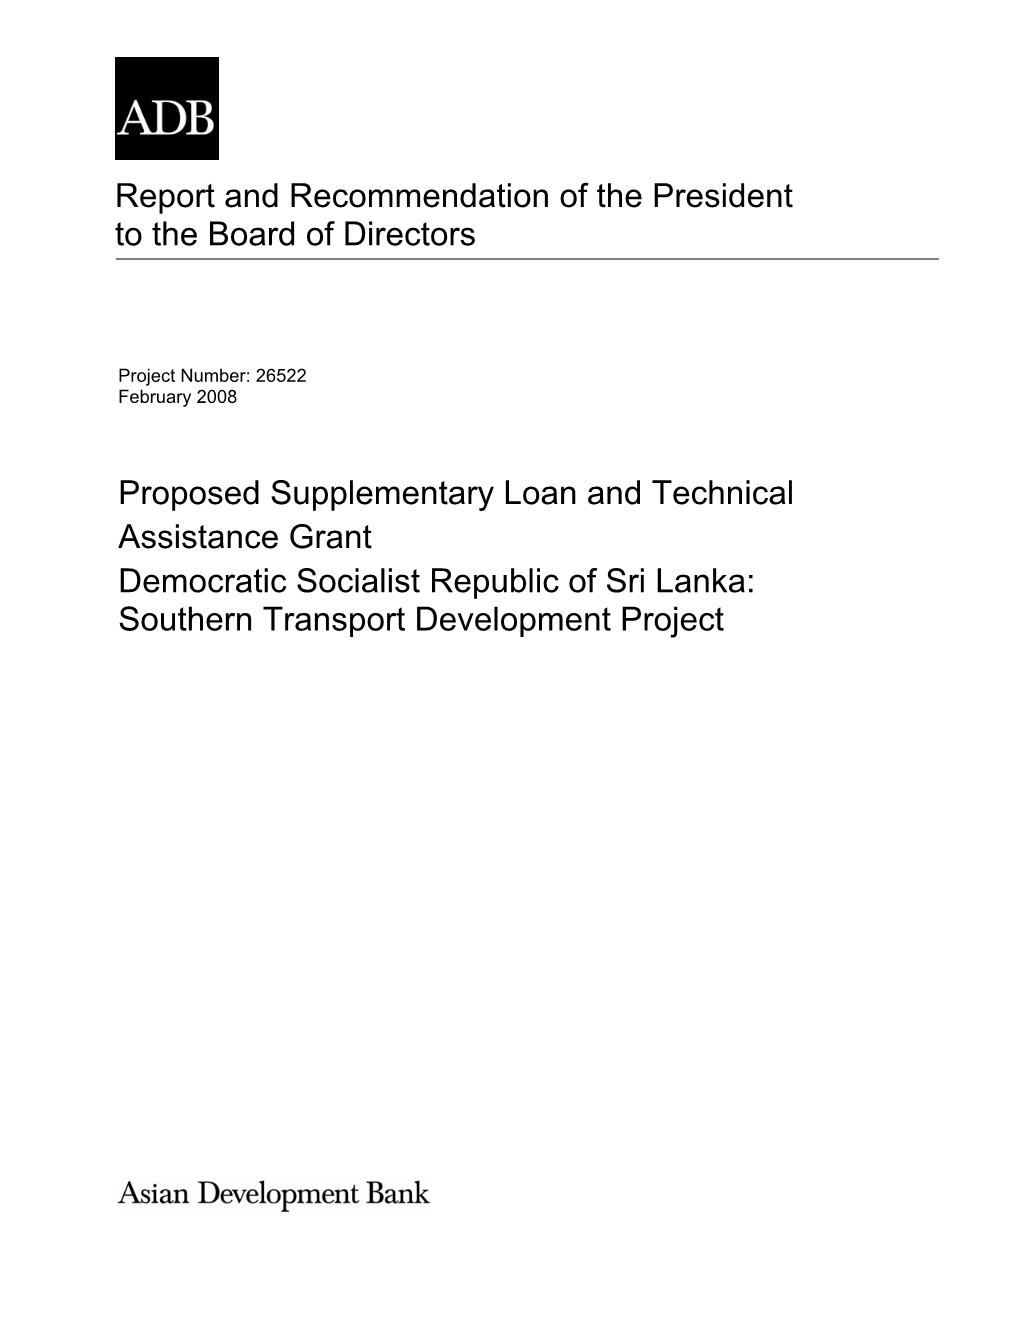 Proposed Supplementary Loan and Technical Assistance Grant Democratic Socialist Republic of Sri Lanka: Southern Transport Development Project